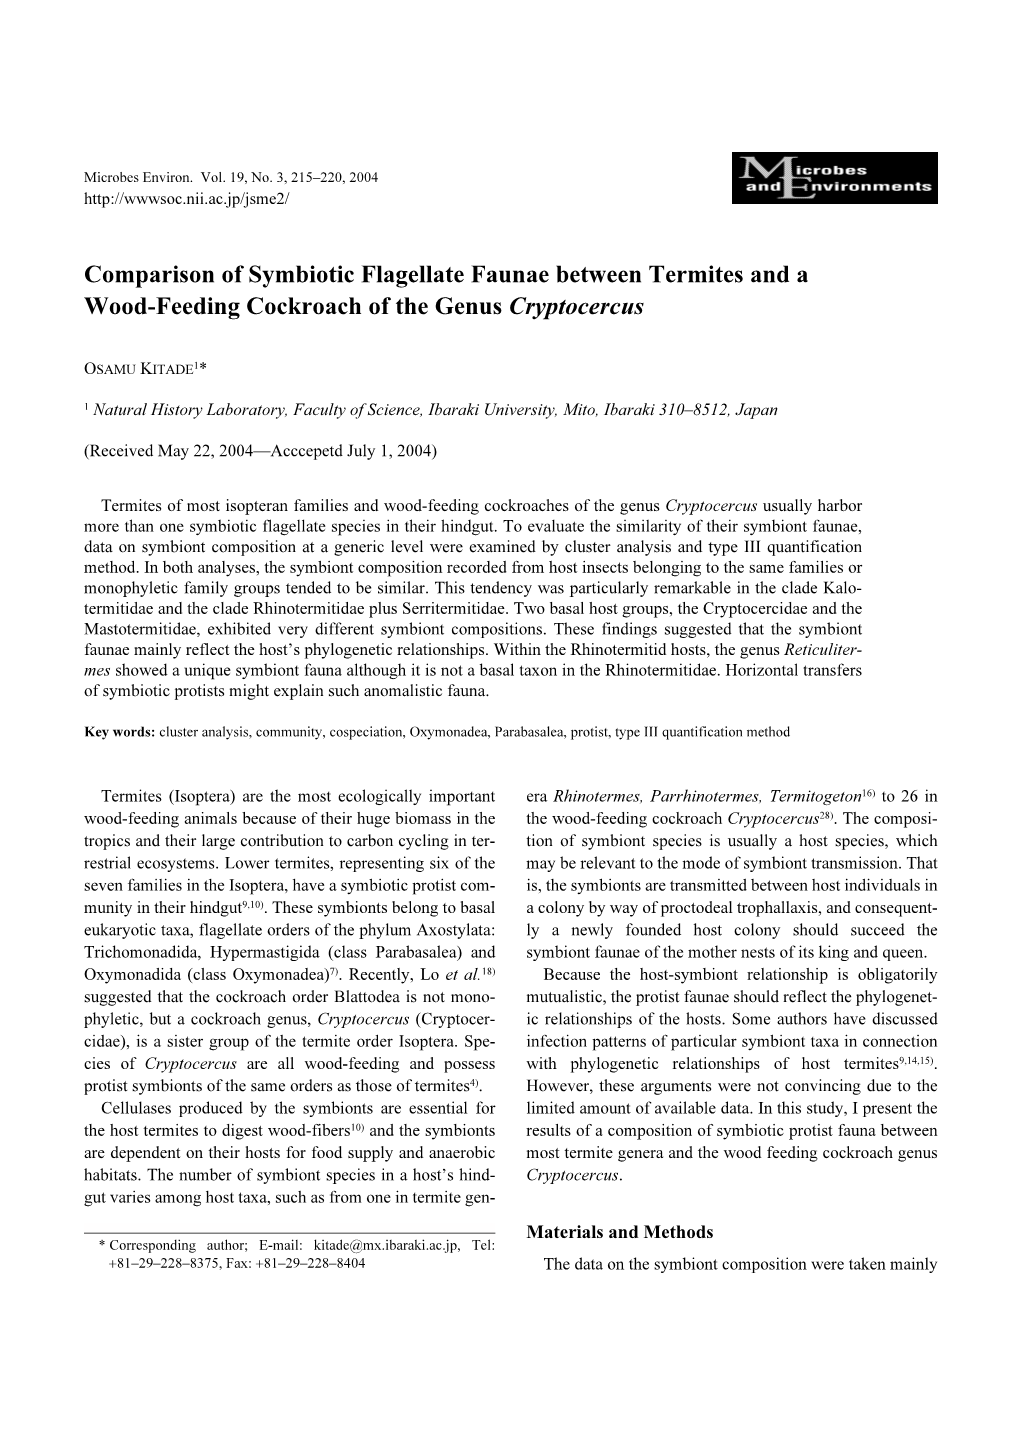 Comparison of Symbiotic Flagellate Faunae Between Termites and a Wood-Feeding Cockroach of the Genus Cryptocercus